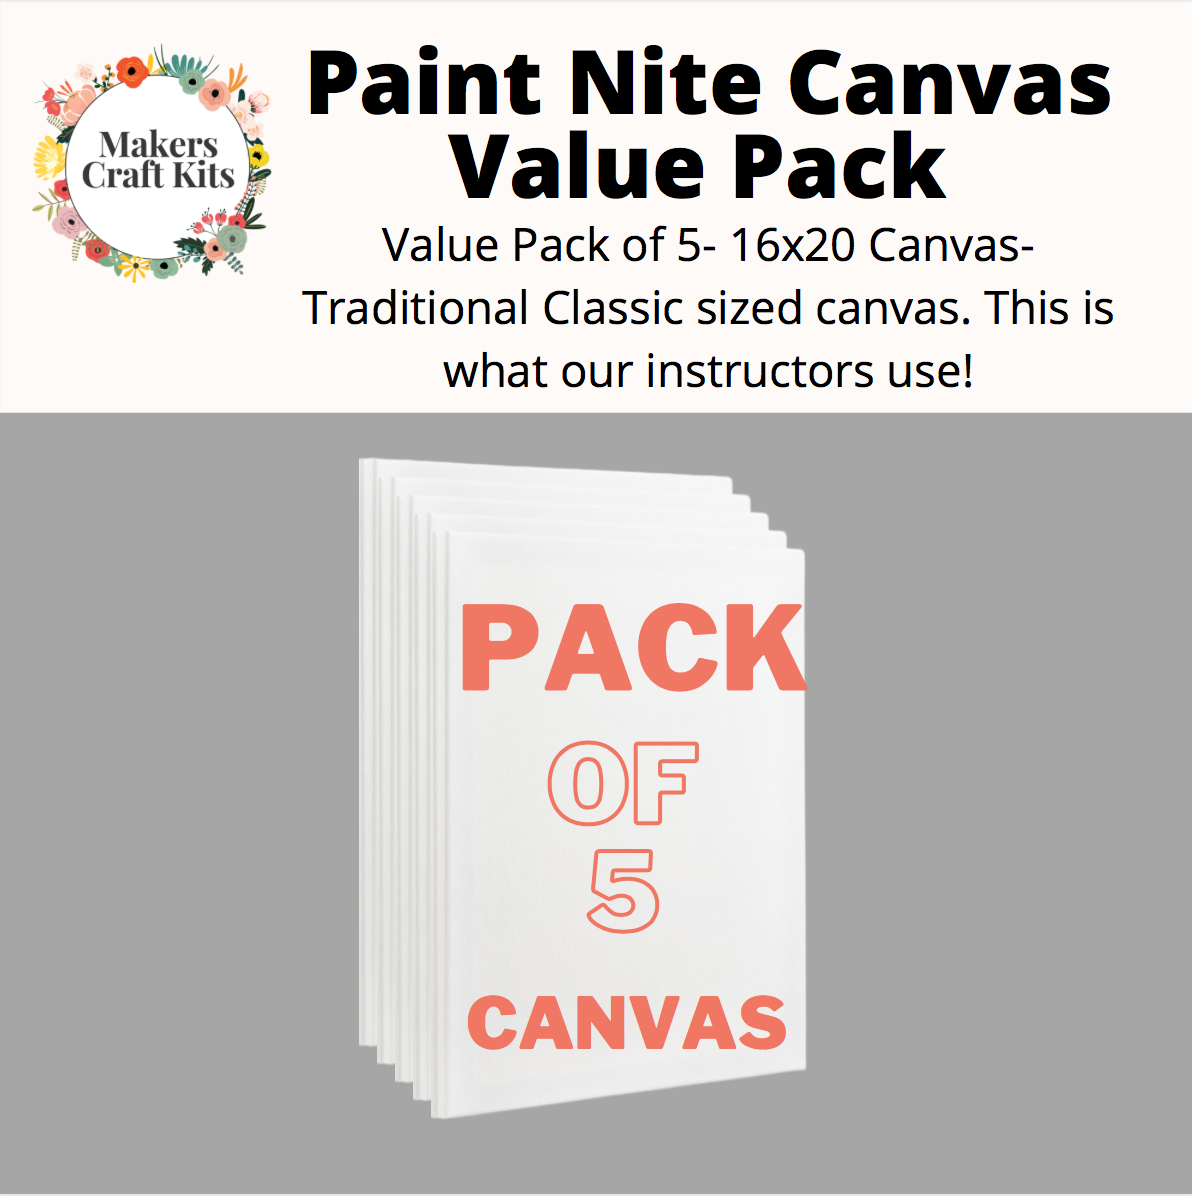 Artist's Loft Super Value Canvas Pack 16 x 20 inches- PACK of 5 canvases